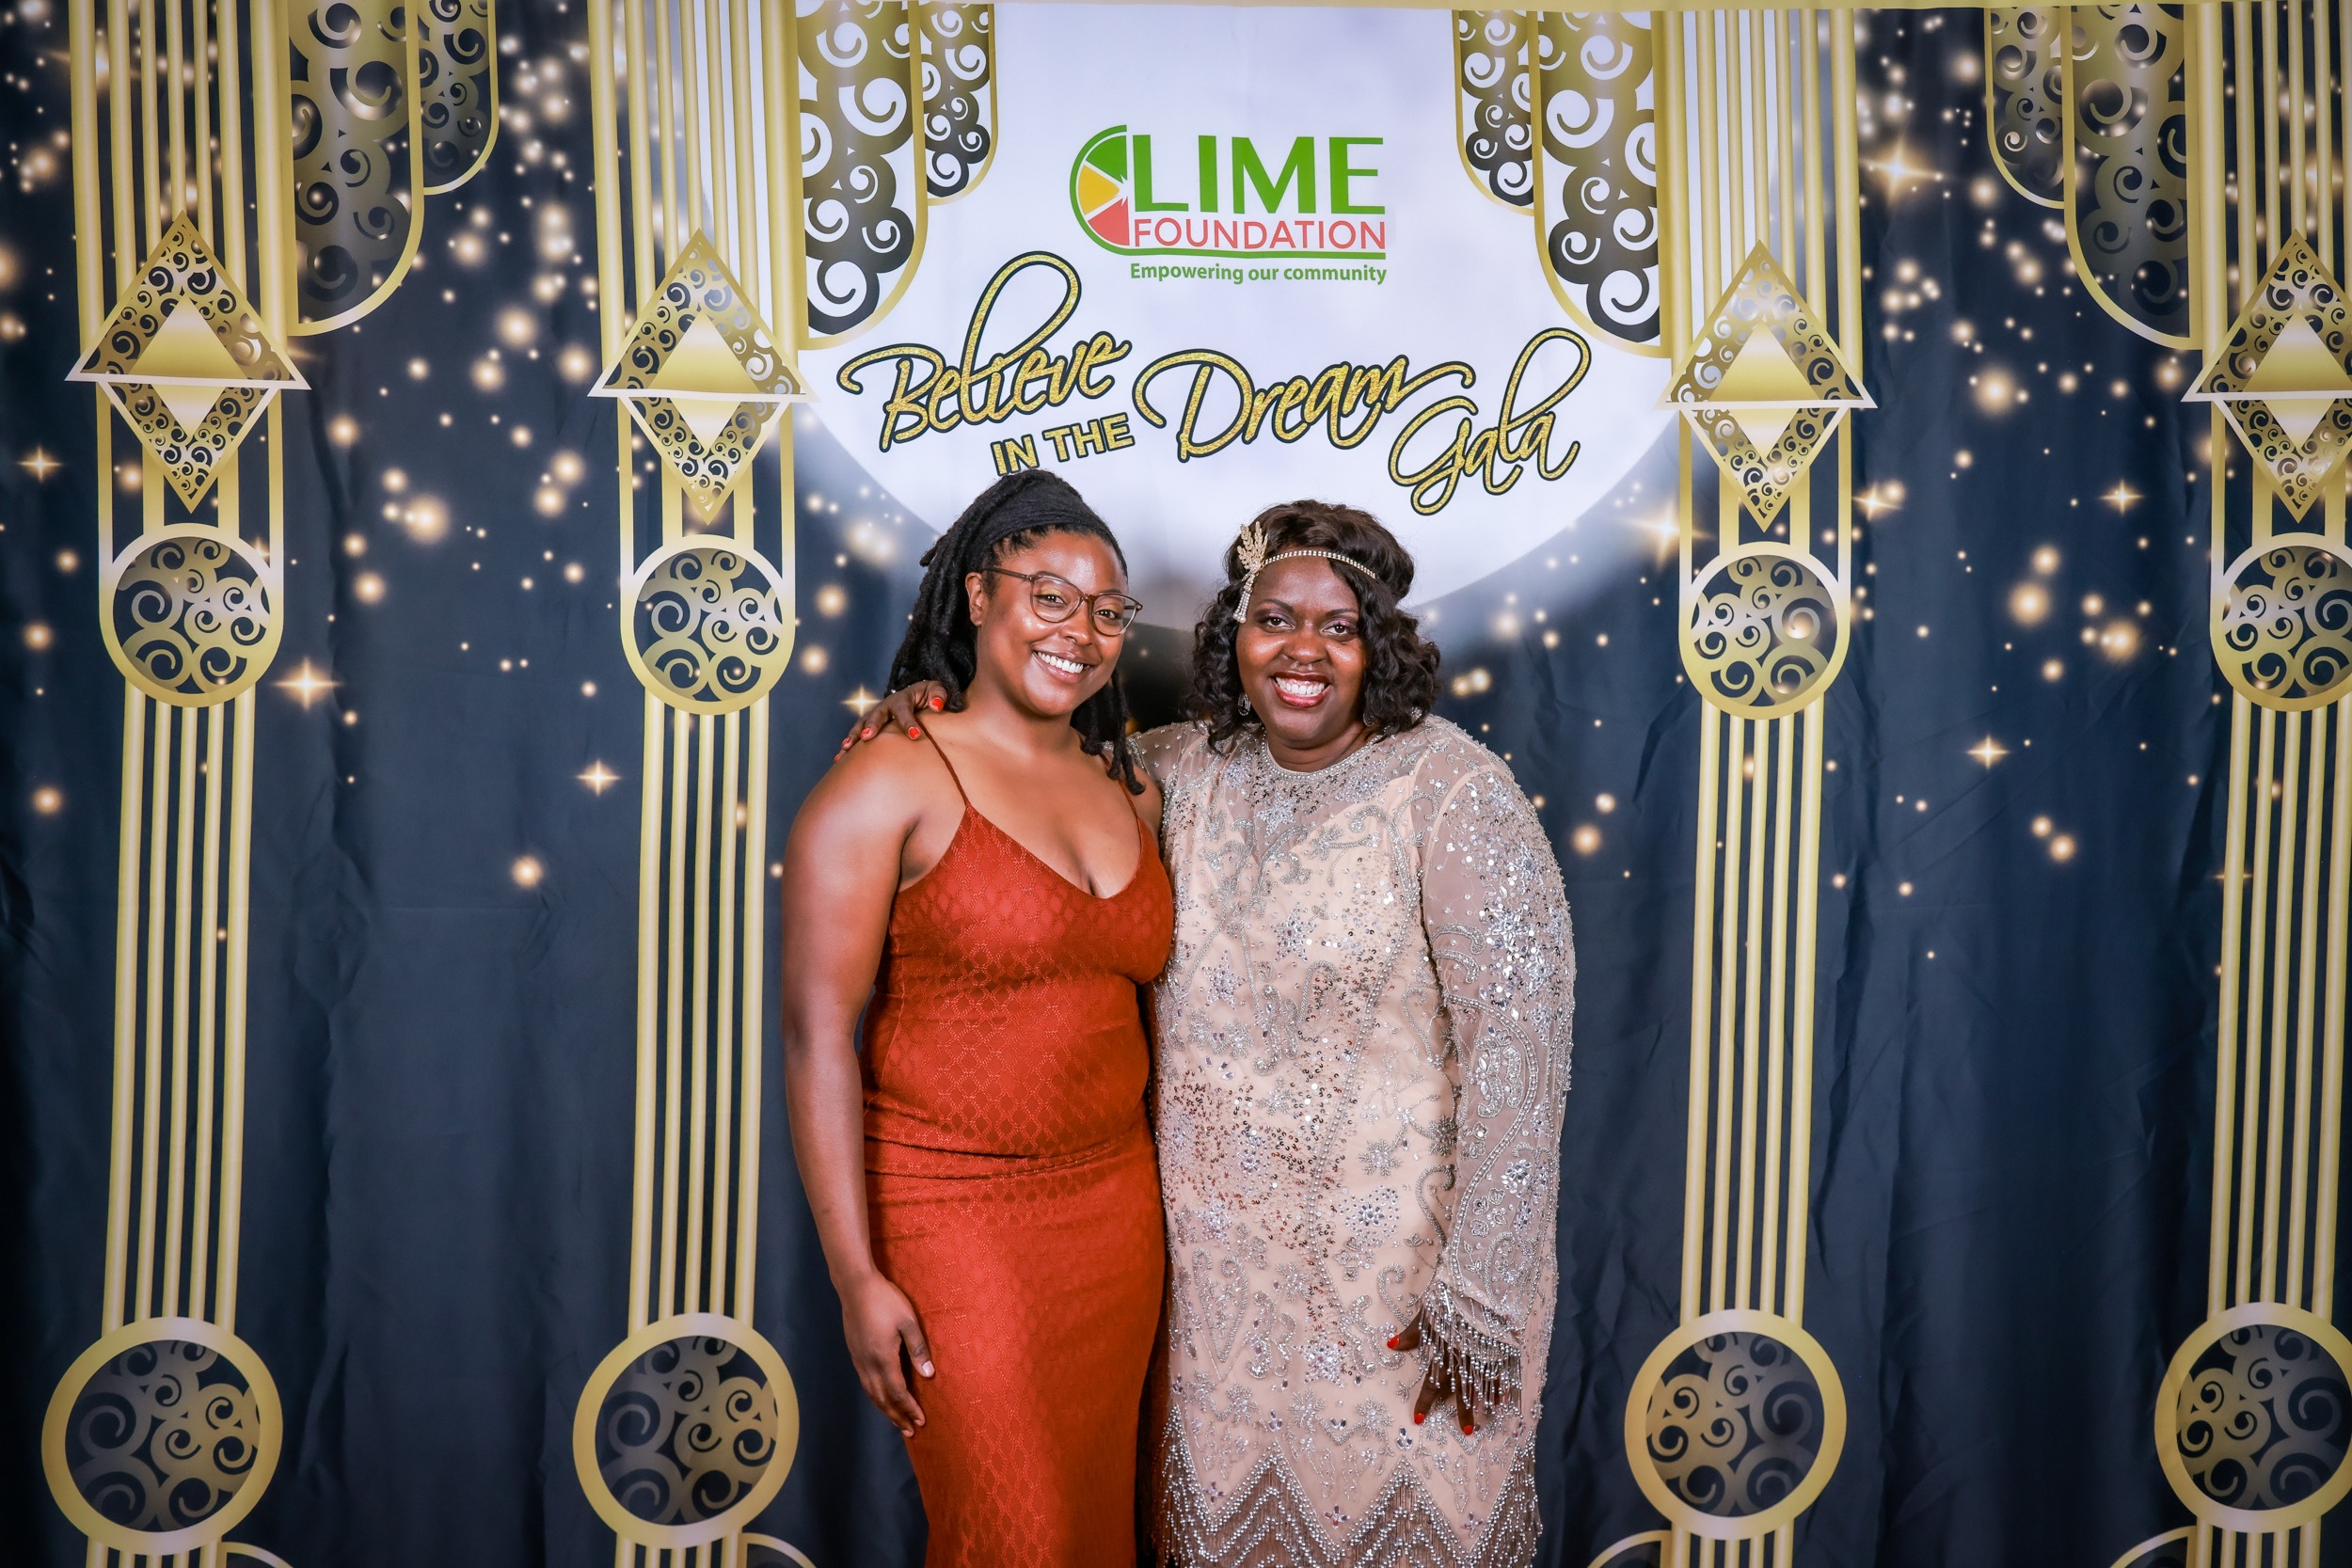 Two women posing for a photo at an event hosted by Sonoma County Non-Profit Organization, The LIME Foundation of Santa Rosa.